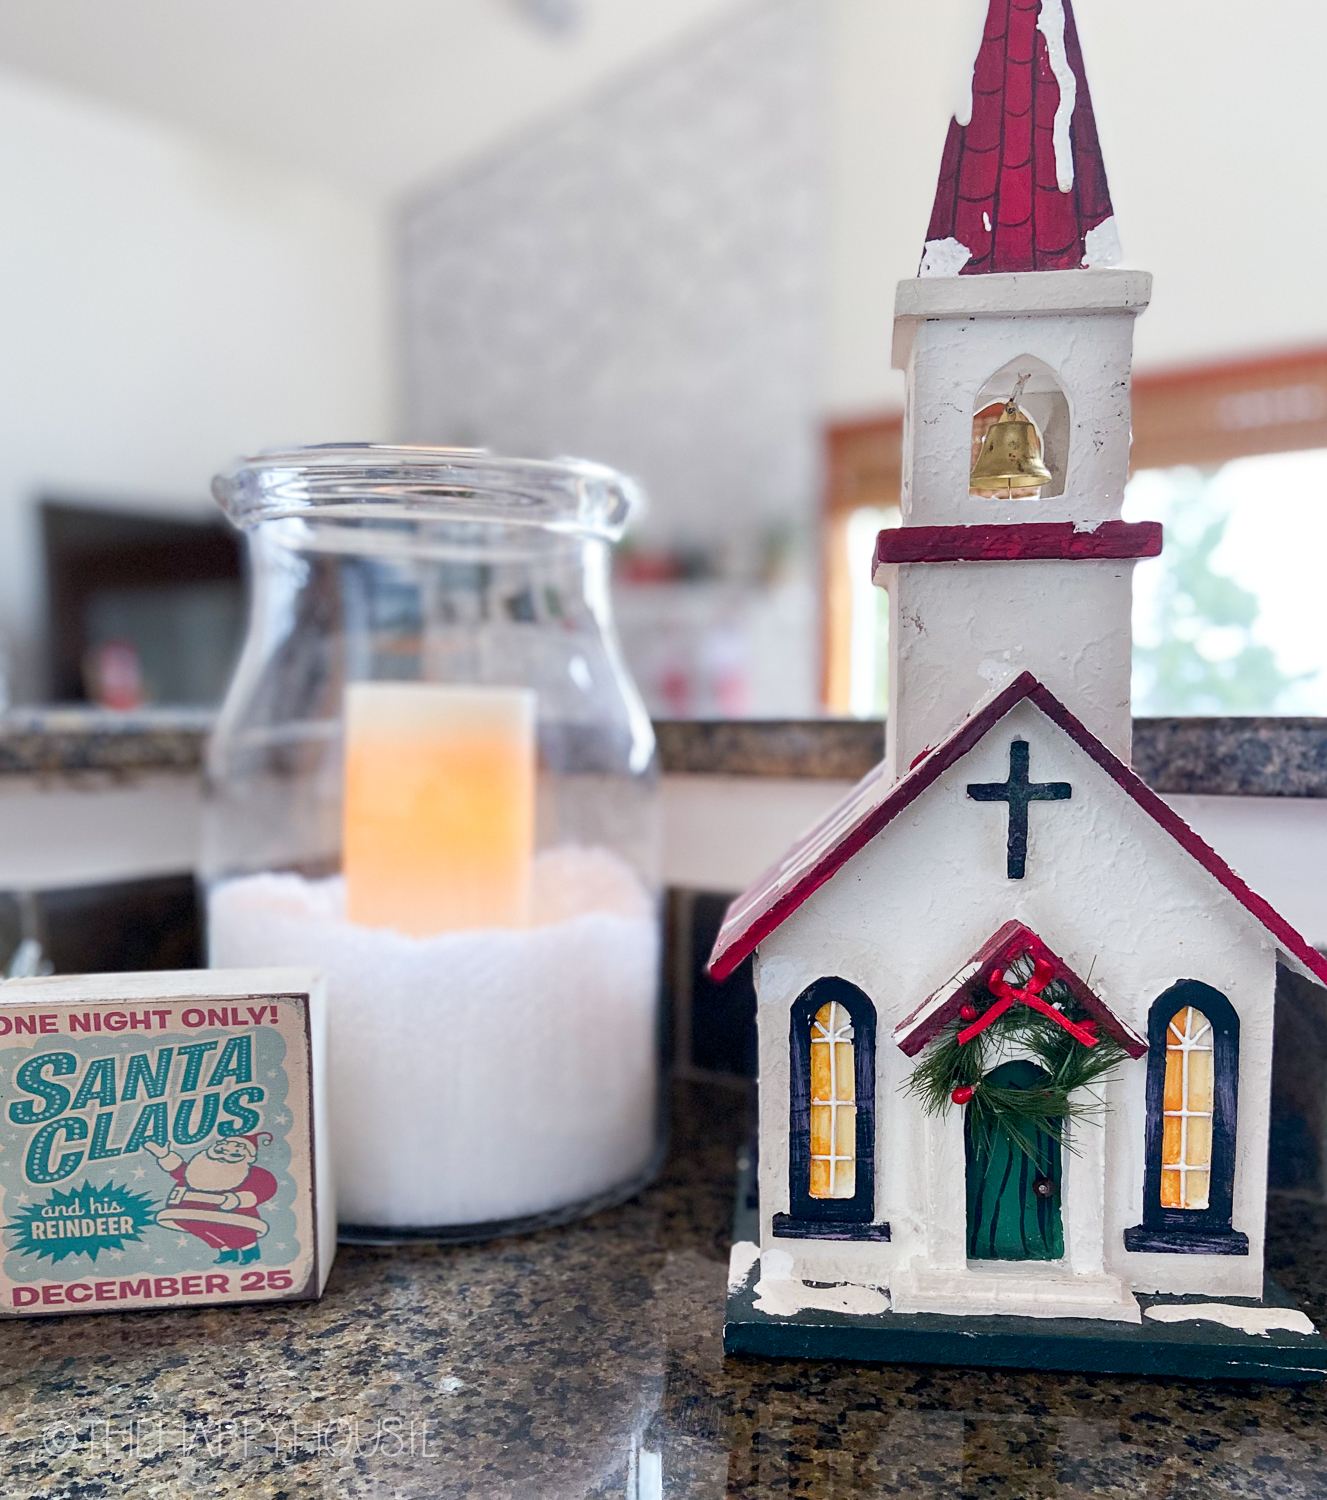 A small church and a candle in a jar on the counter.